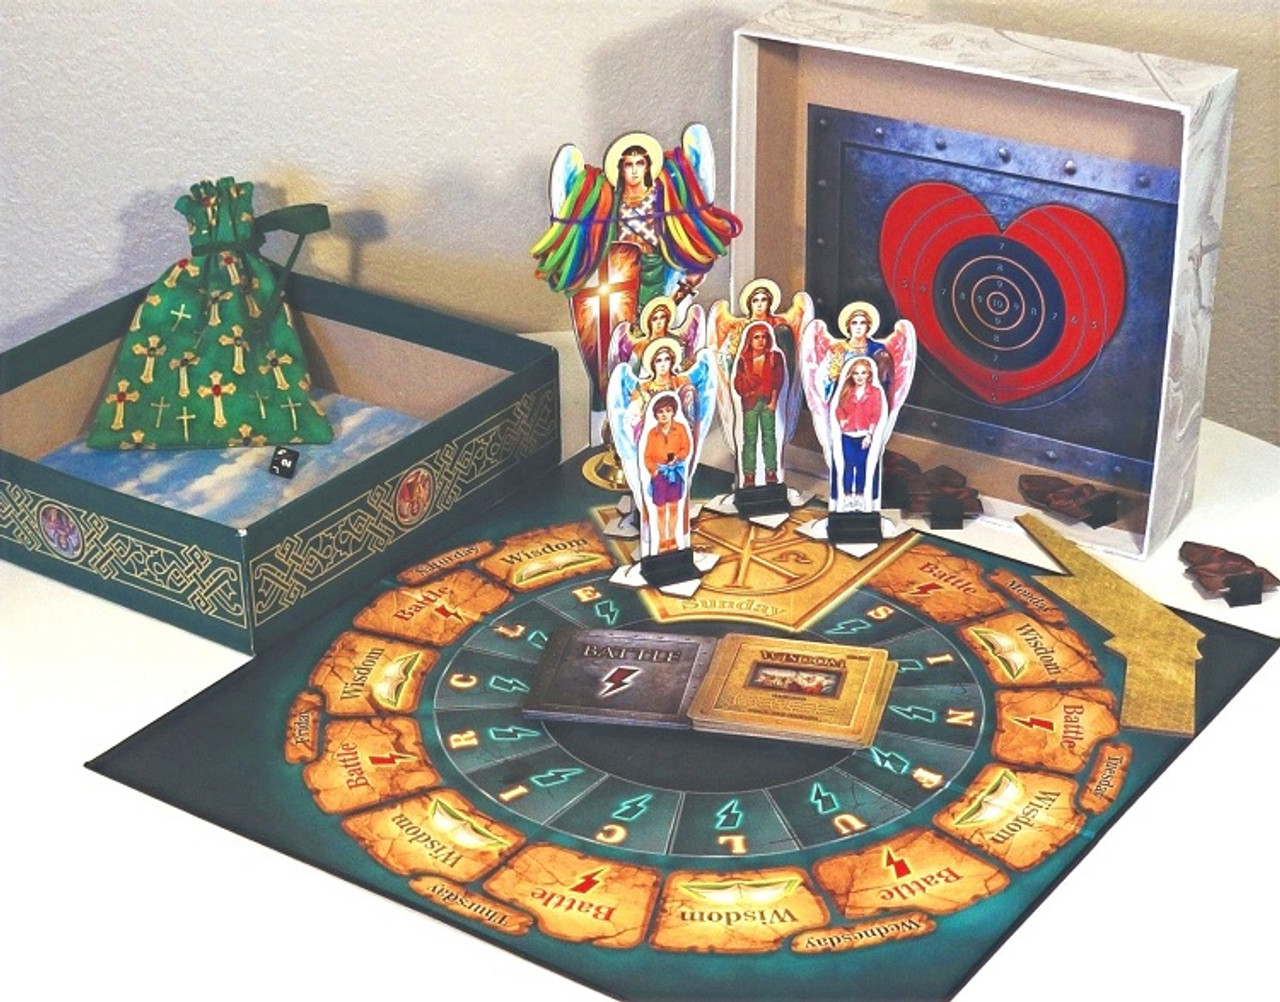 Go for it: Ancient board game holds logical and artistic appeal